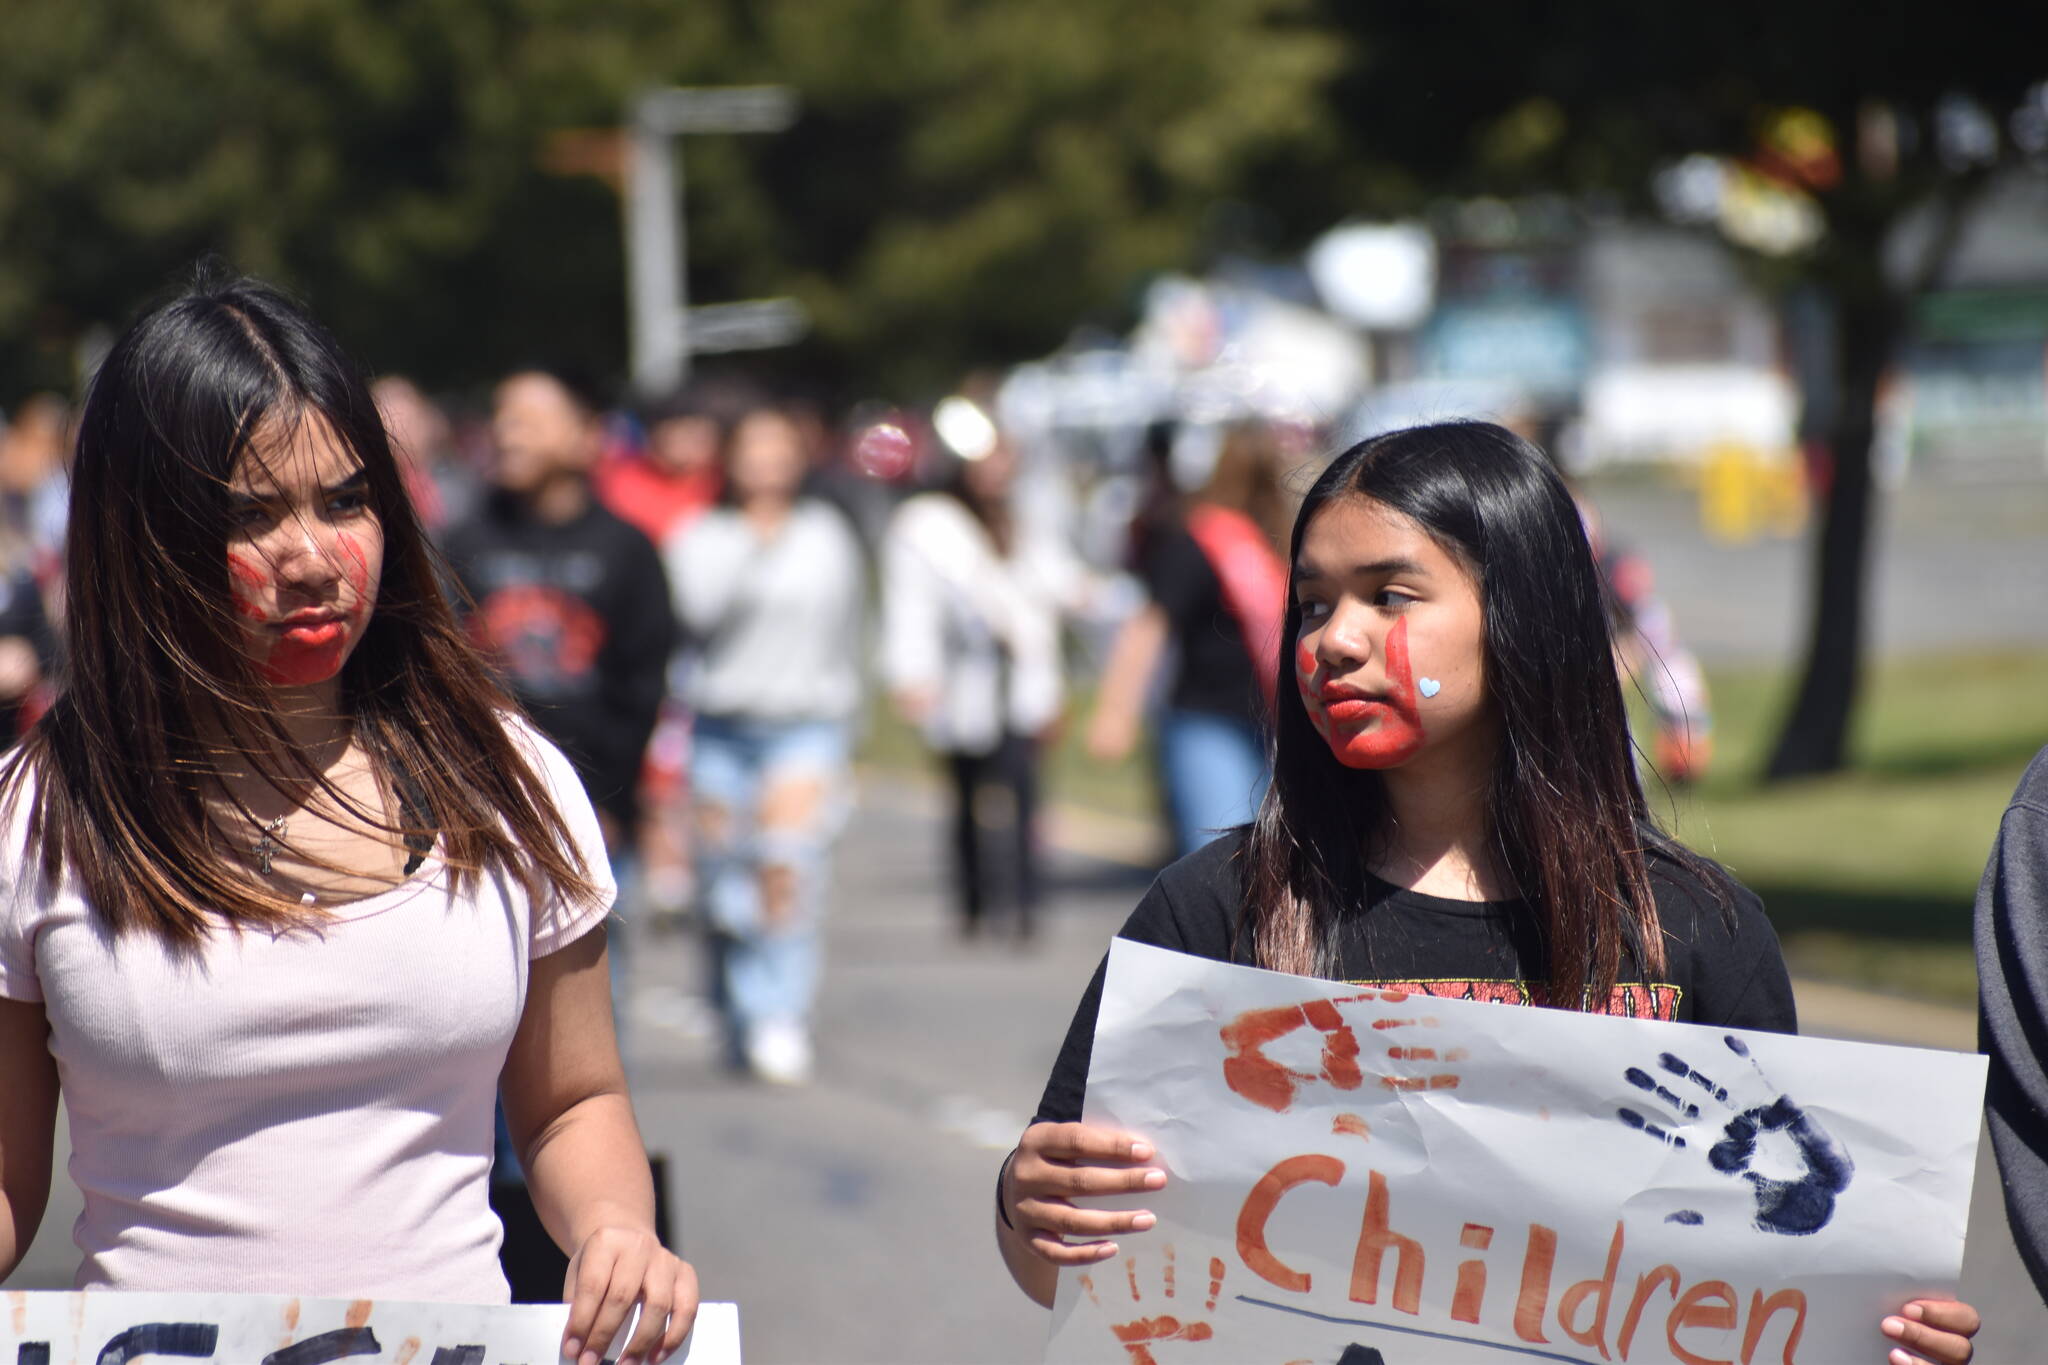 Clayton Franke / The Daily World
Sisters Markie (right) and Kenzie McCrory led a walk down Point Brown Avenue in Ocean Shores May 7 to raise awareness for Missing and Murdered Indigenous People.